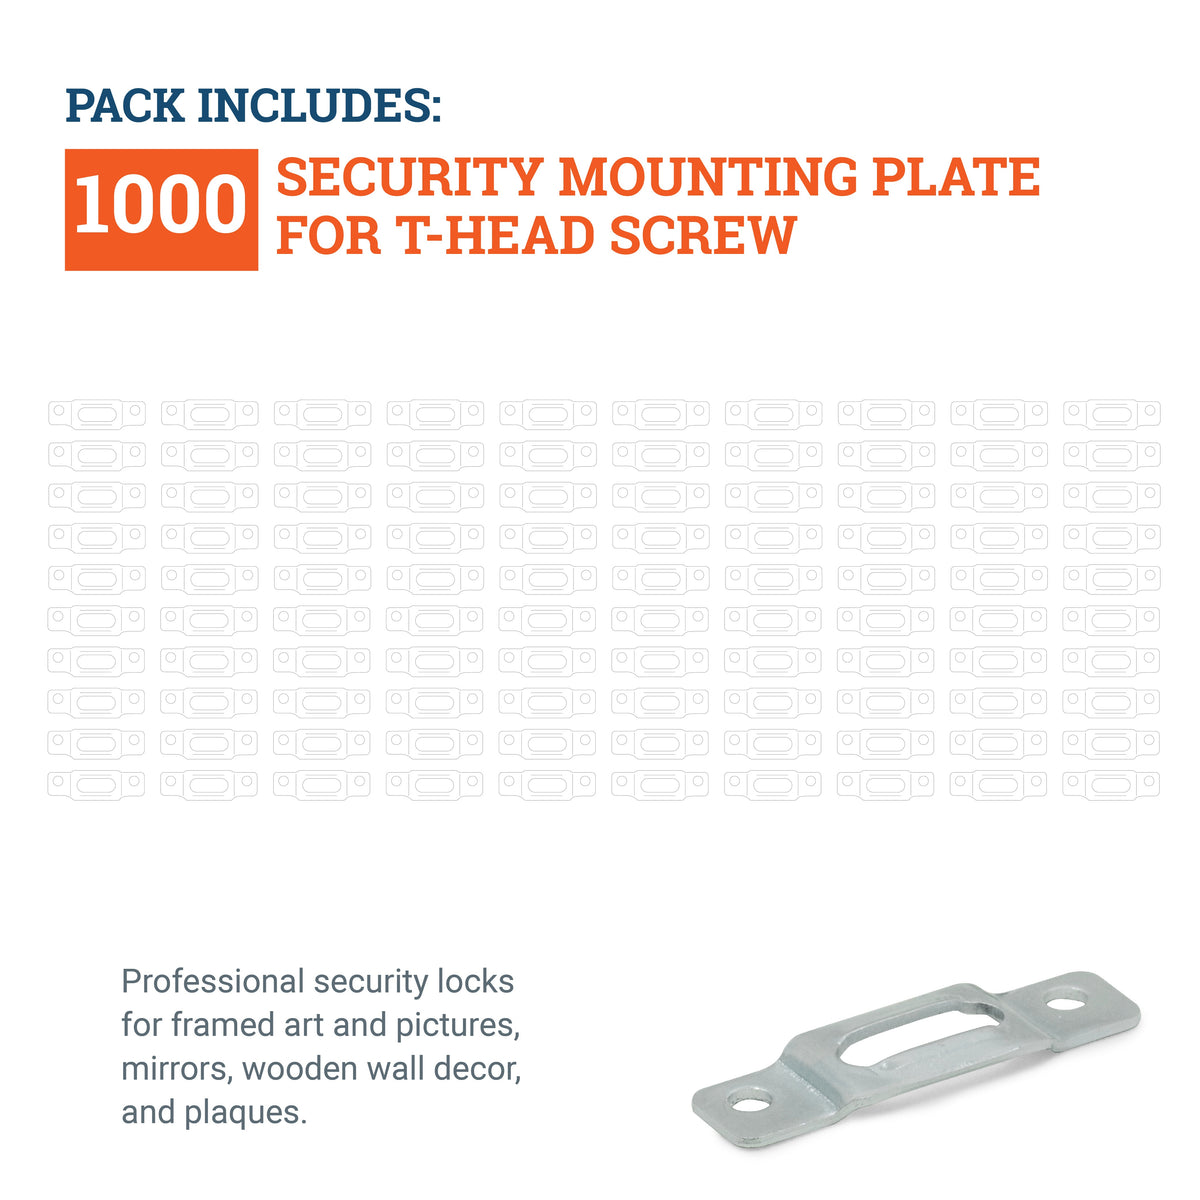 Security Mounting Plate for T-Head Screw - 1000 Pack ($0.13